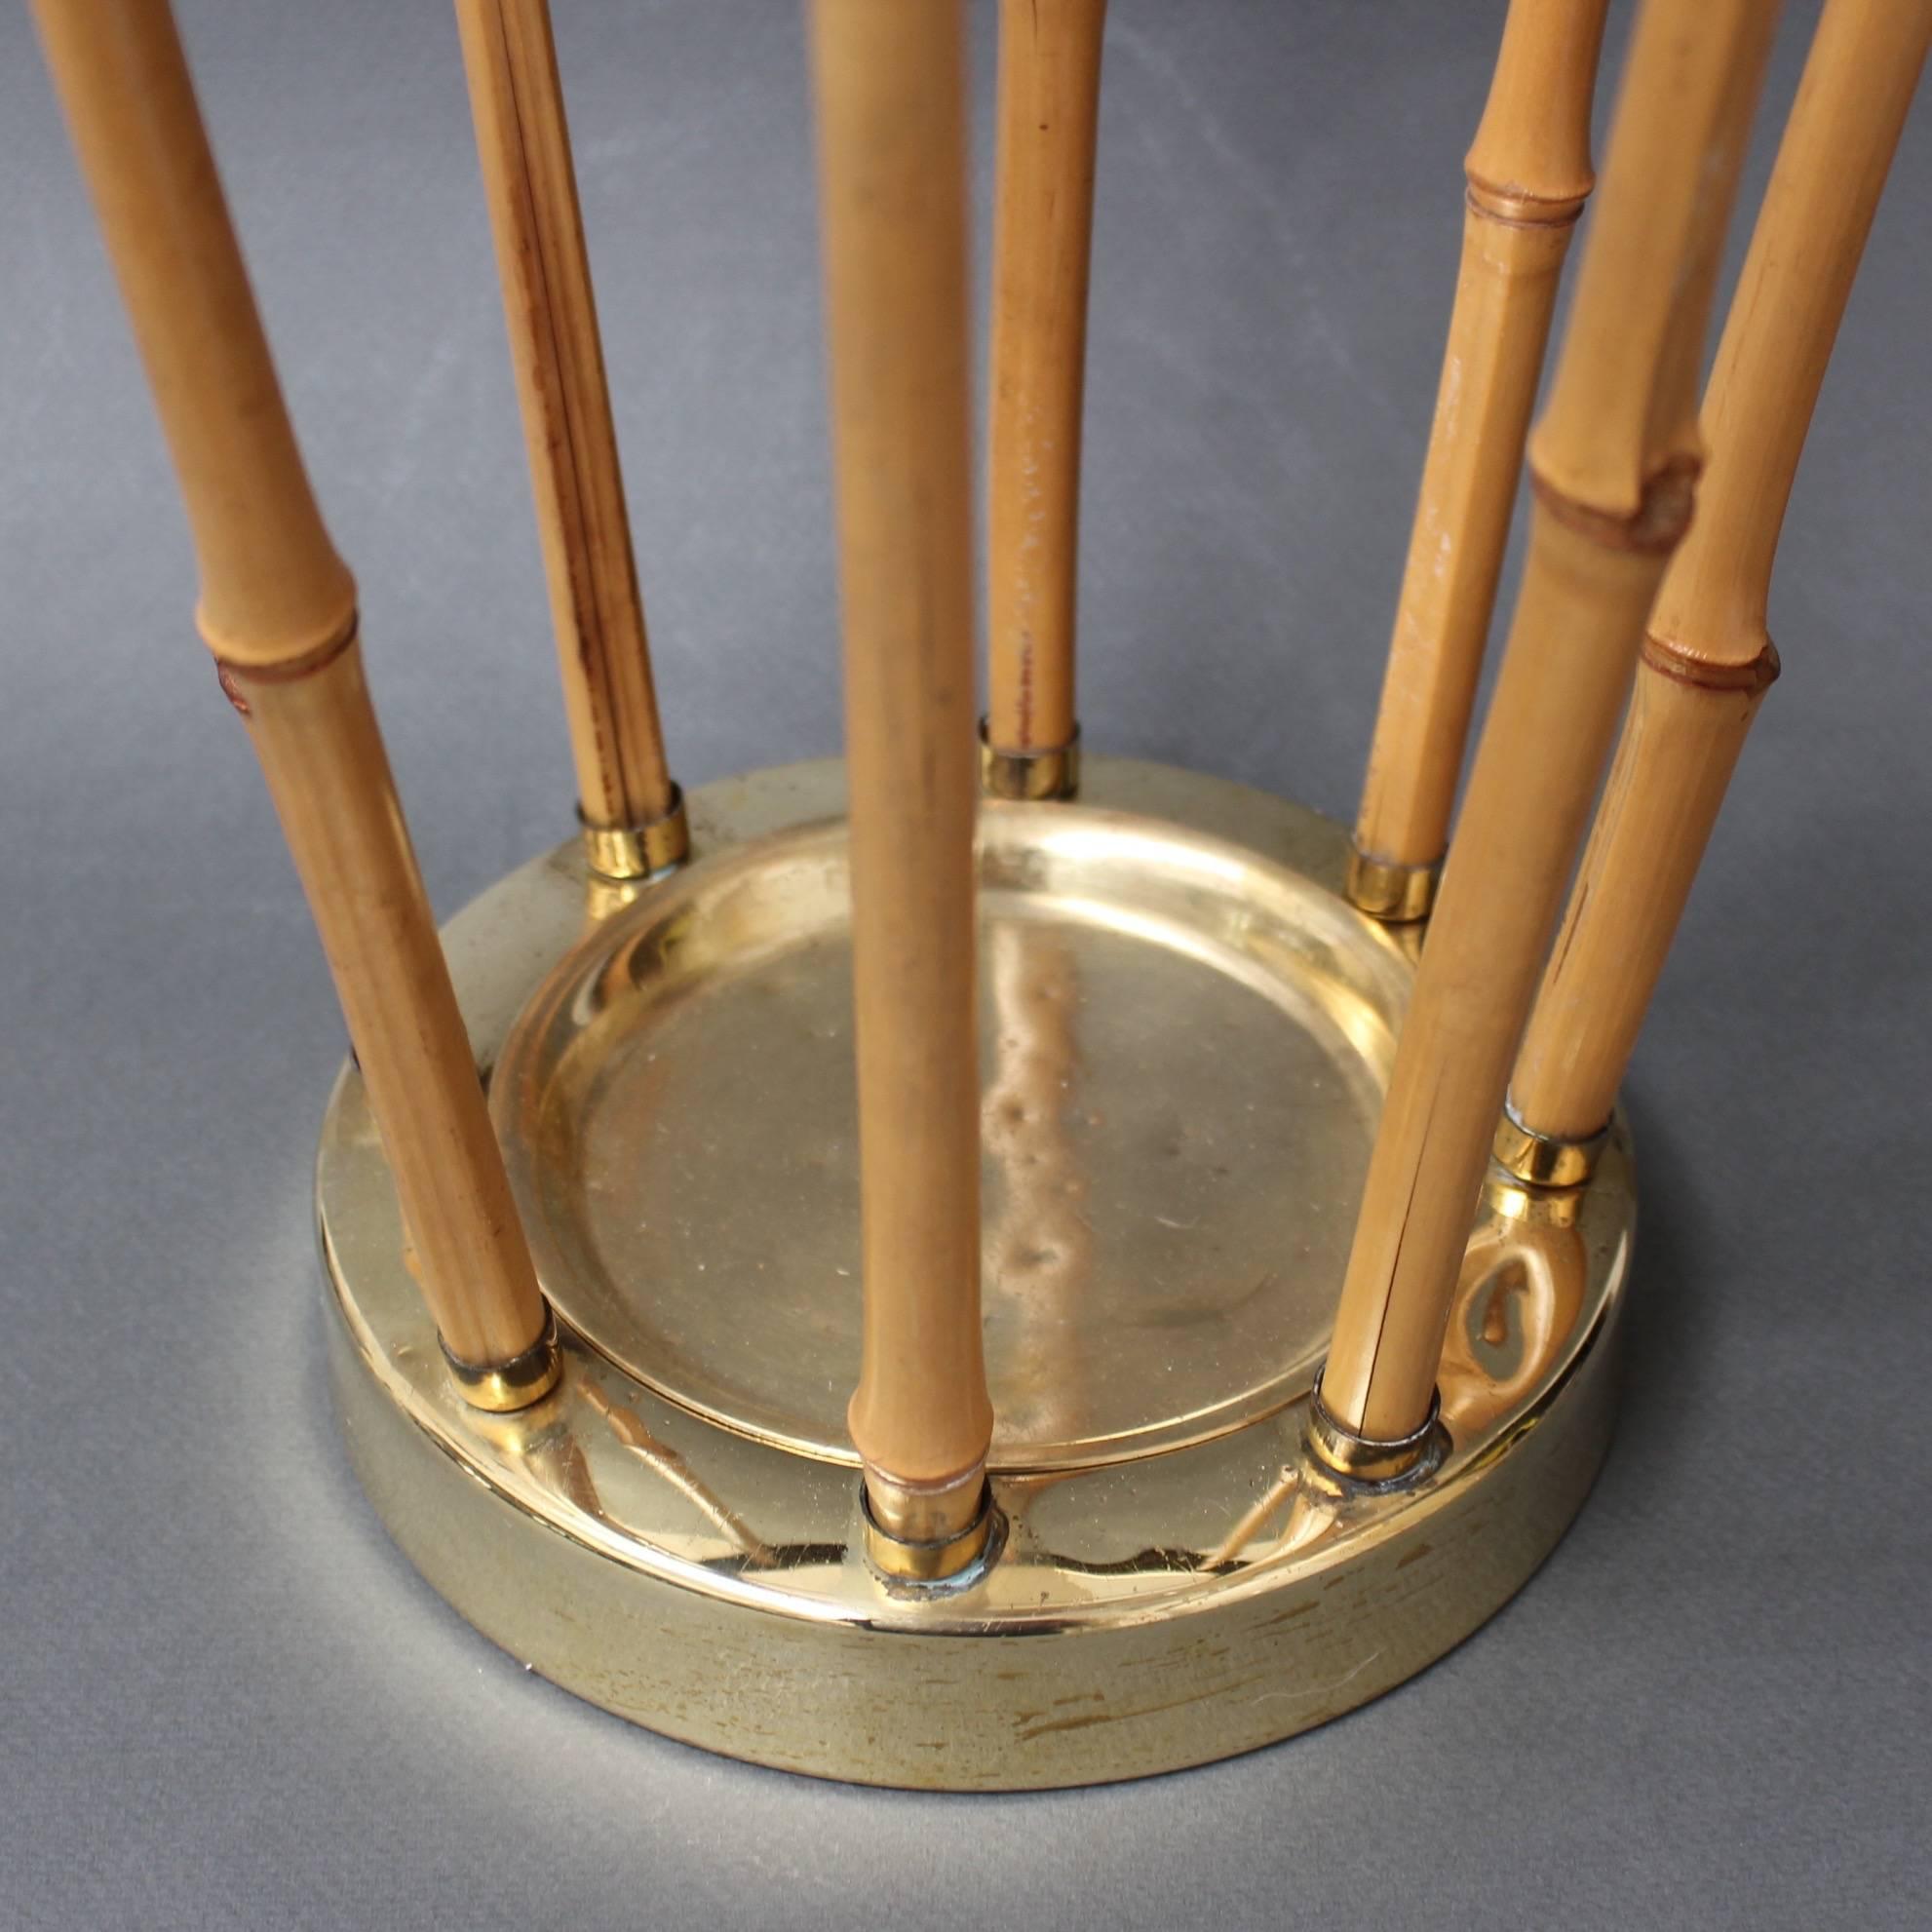 Very sought-after vintage brass and bamboo umbrella stand, made in Austria circa 1950s. The brass is polished to a golden tone and is in excellent vintage condition.

Dimensions:

H 41 cm

D 26 cm.